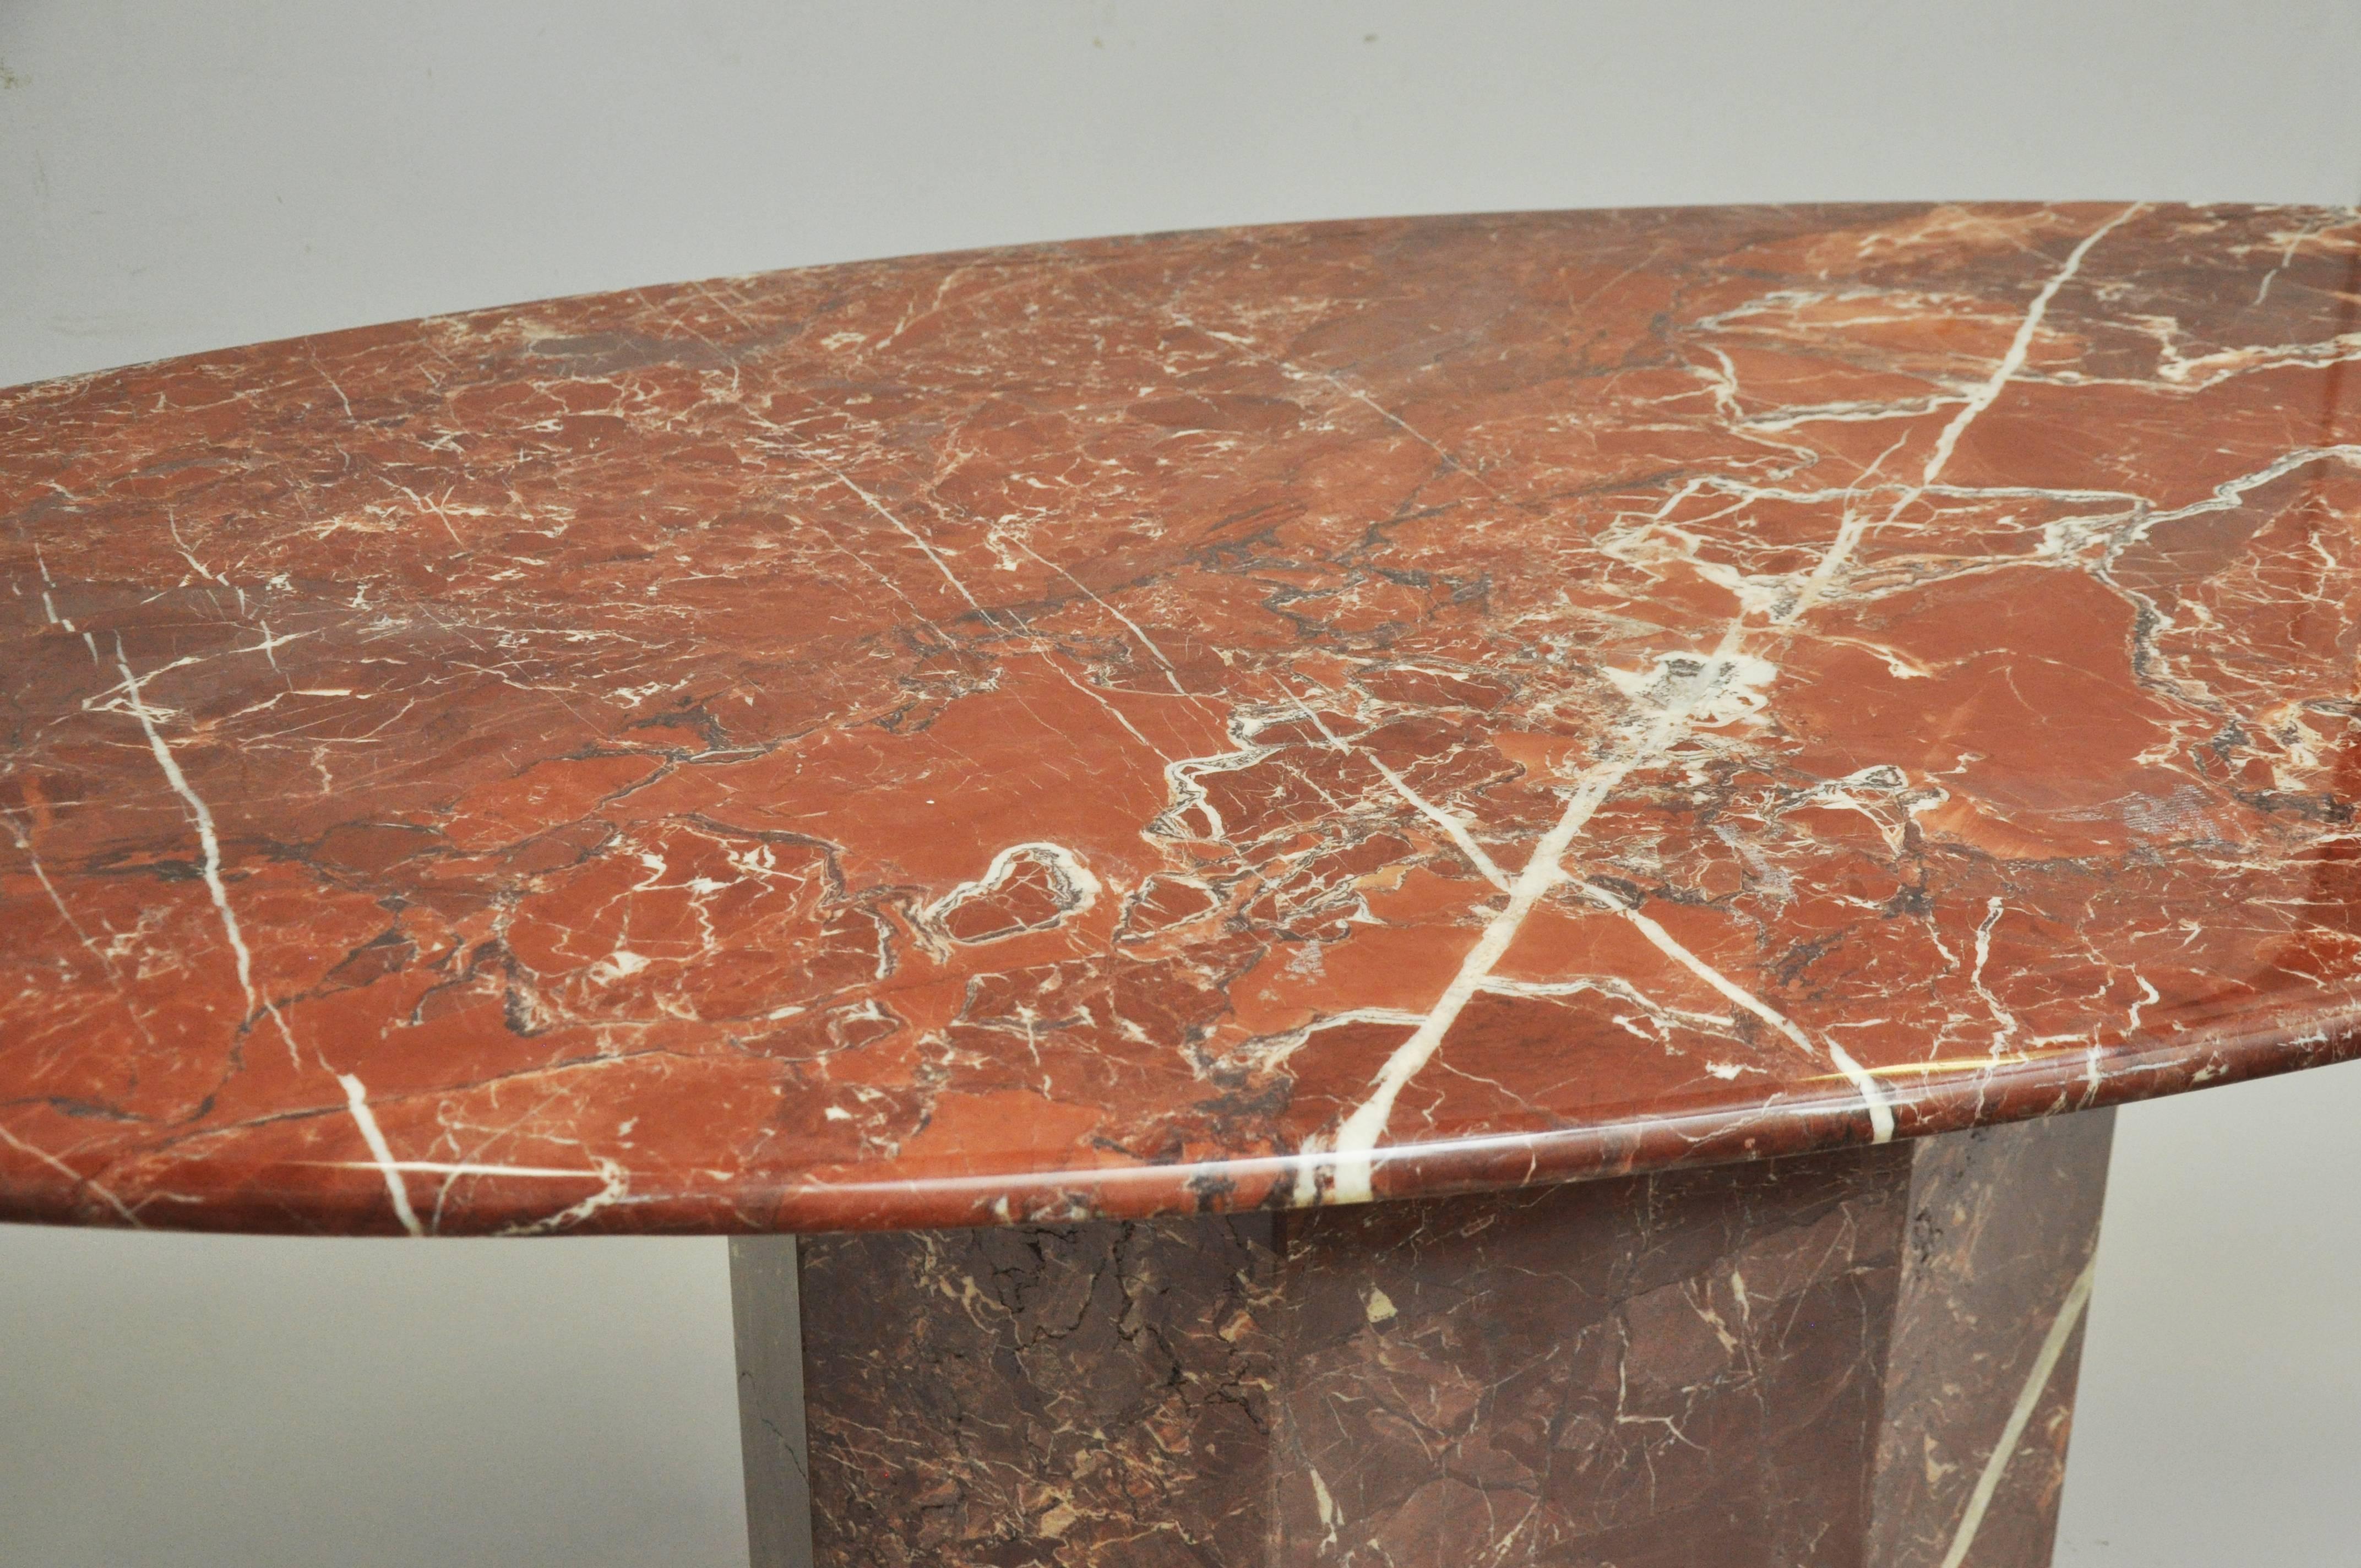 Midcentury highly figured marble top oval dining table resting on octagonal matching marble base. Table is in red tones with striations and veining of off-white and grays.